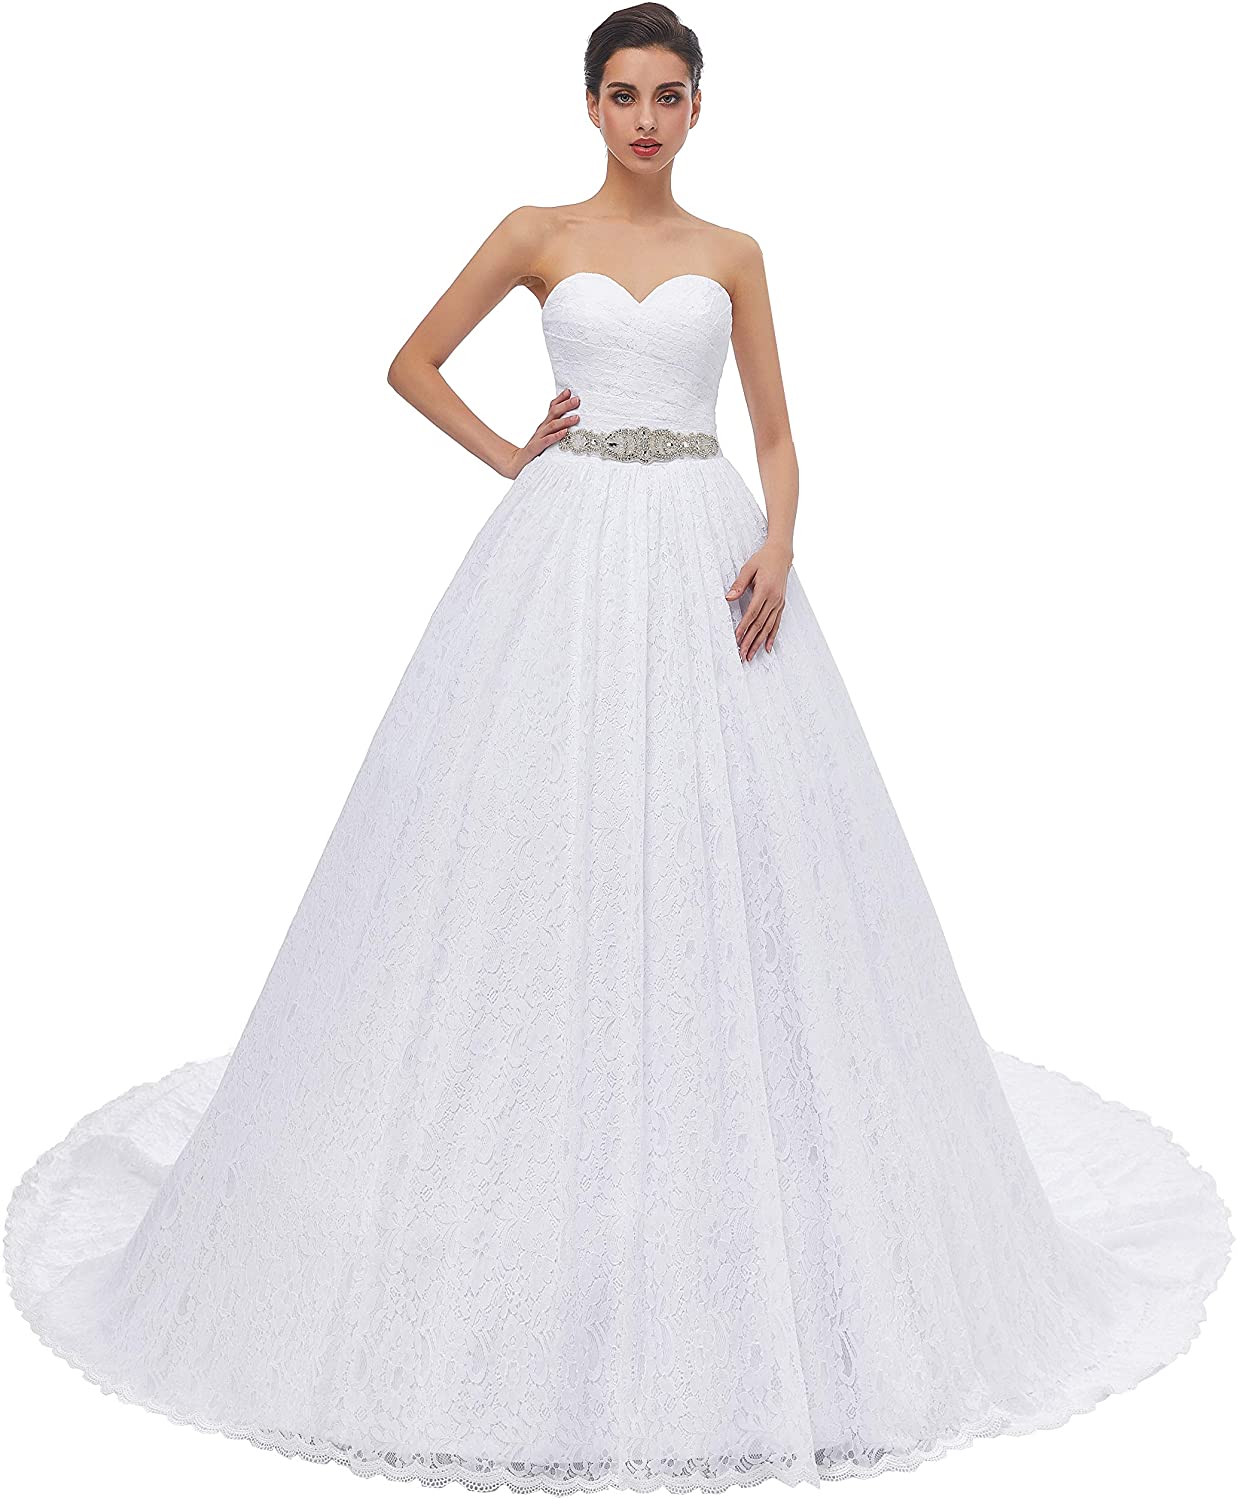 Likedpage Women's Ball Gown Lace Bridal Wedding Dresses | eBay